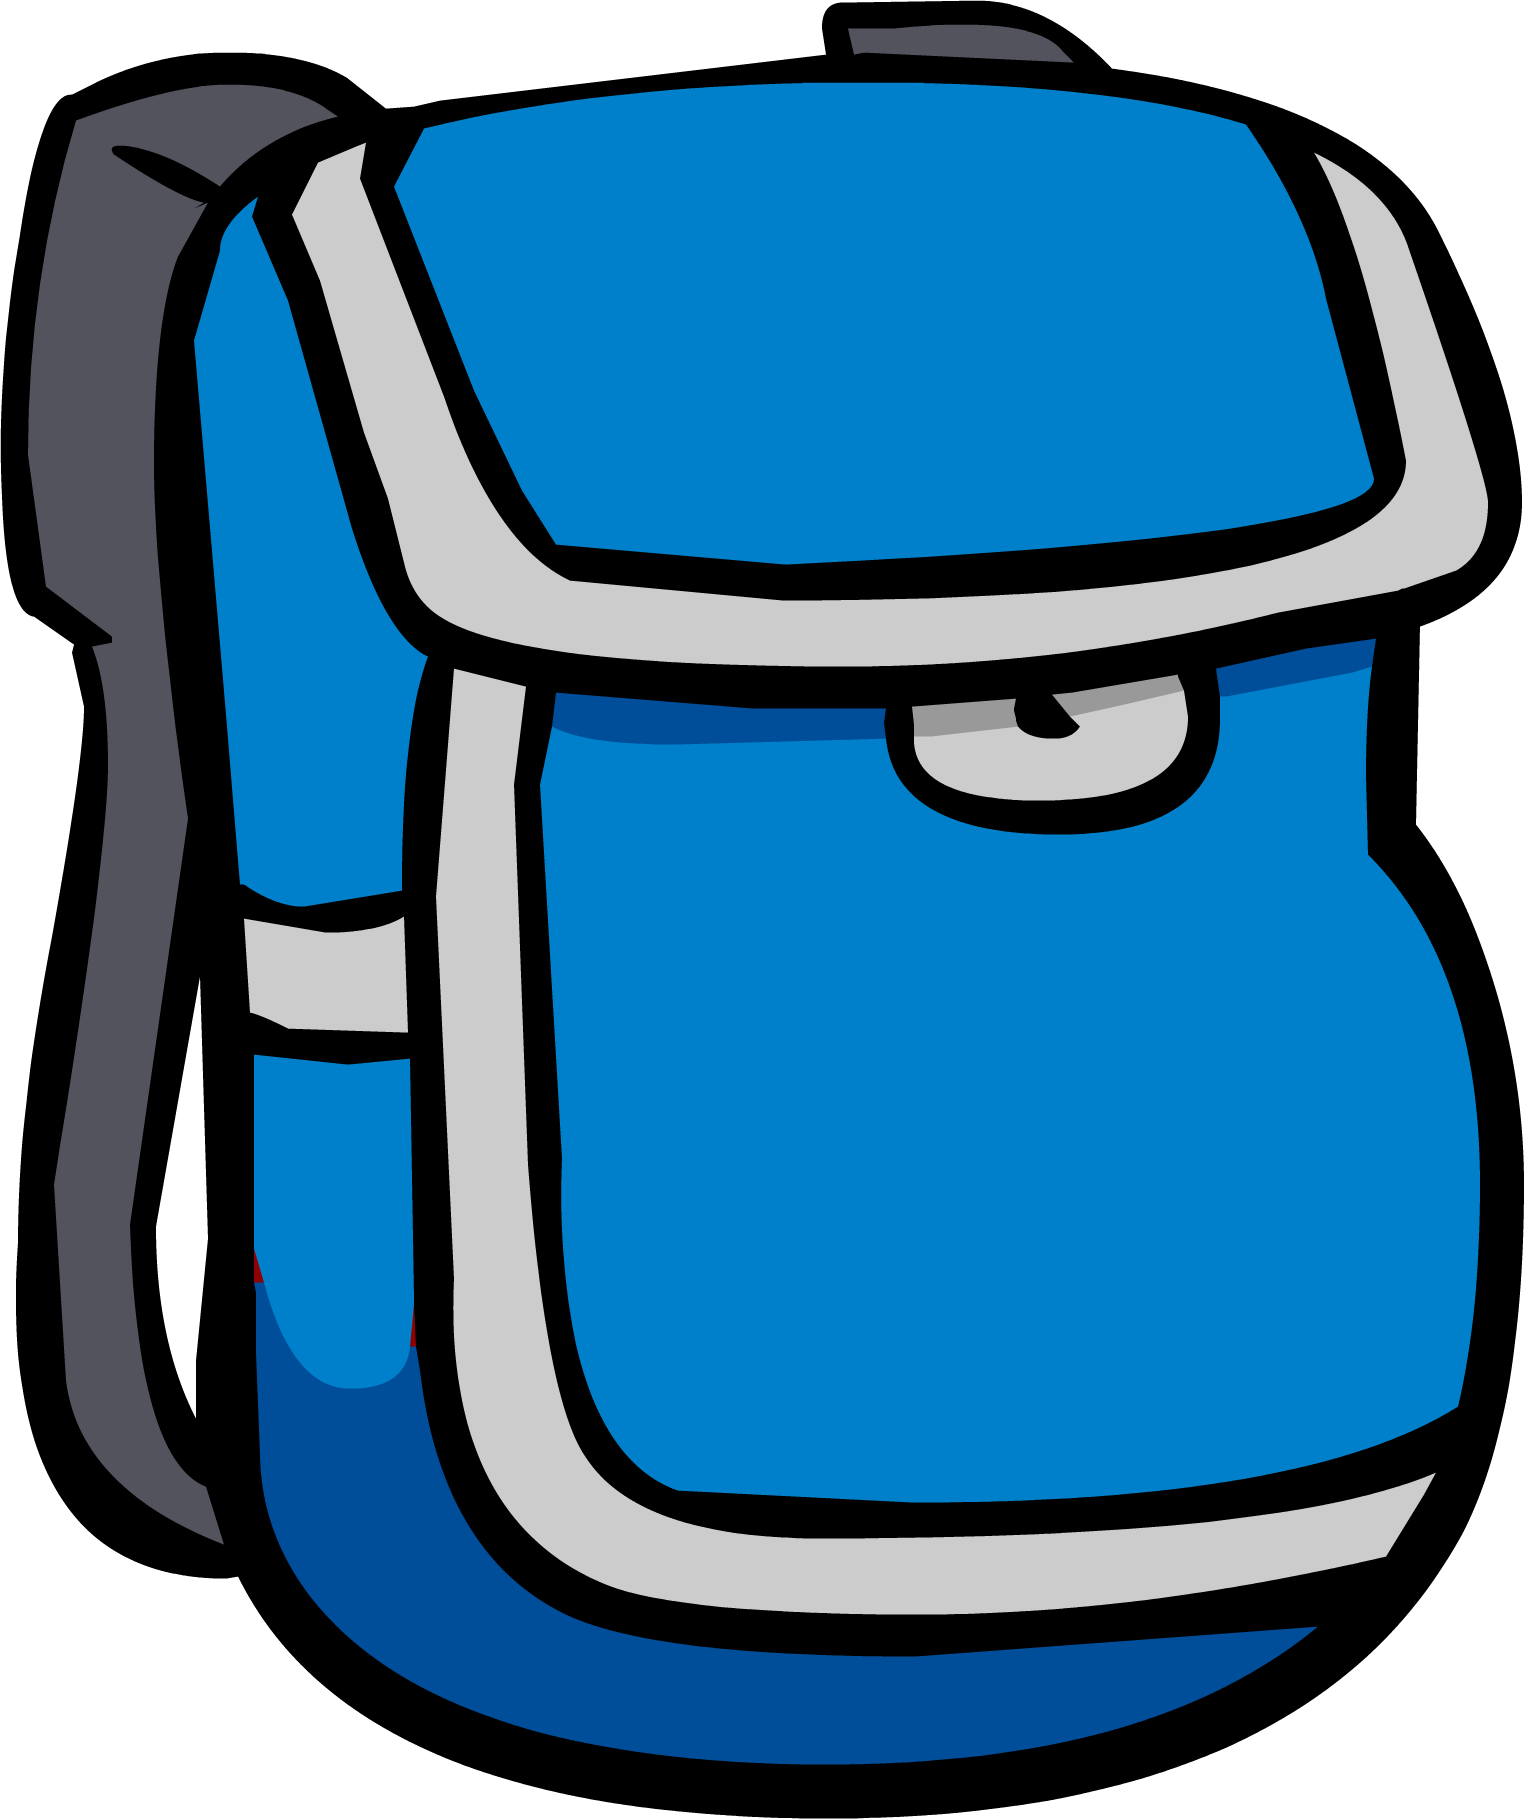 Image - Blue Backpack icon 312.png | Club Penguin Wiki | FANDOM powered